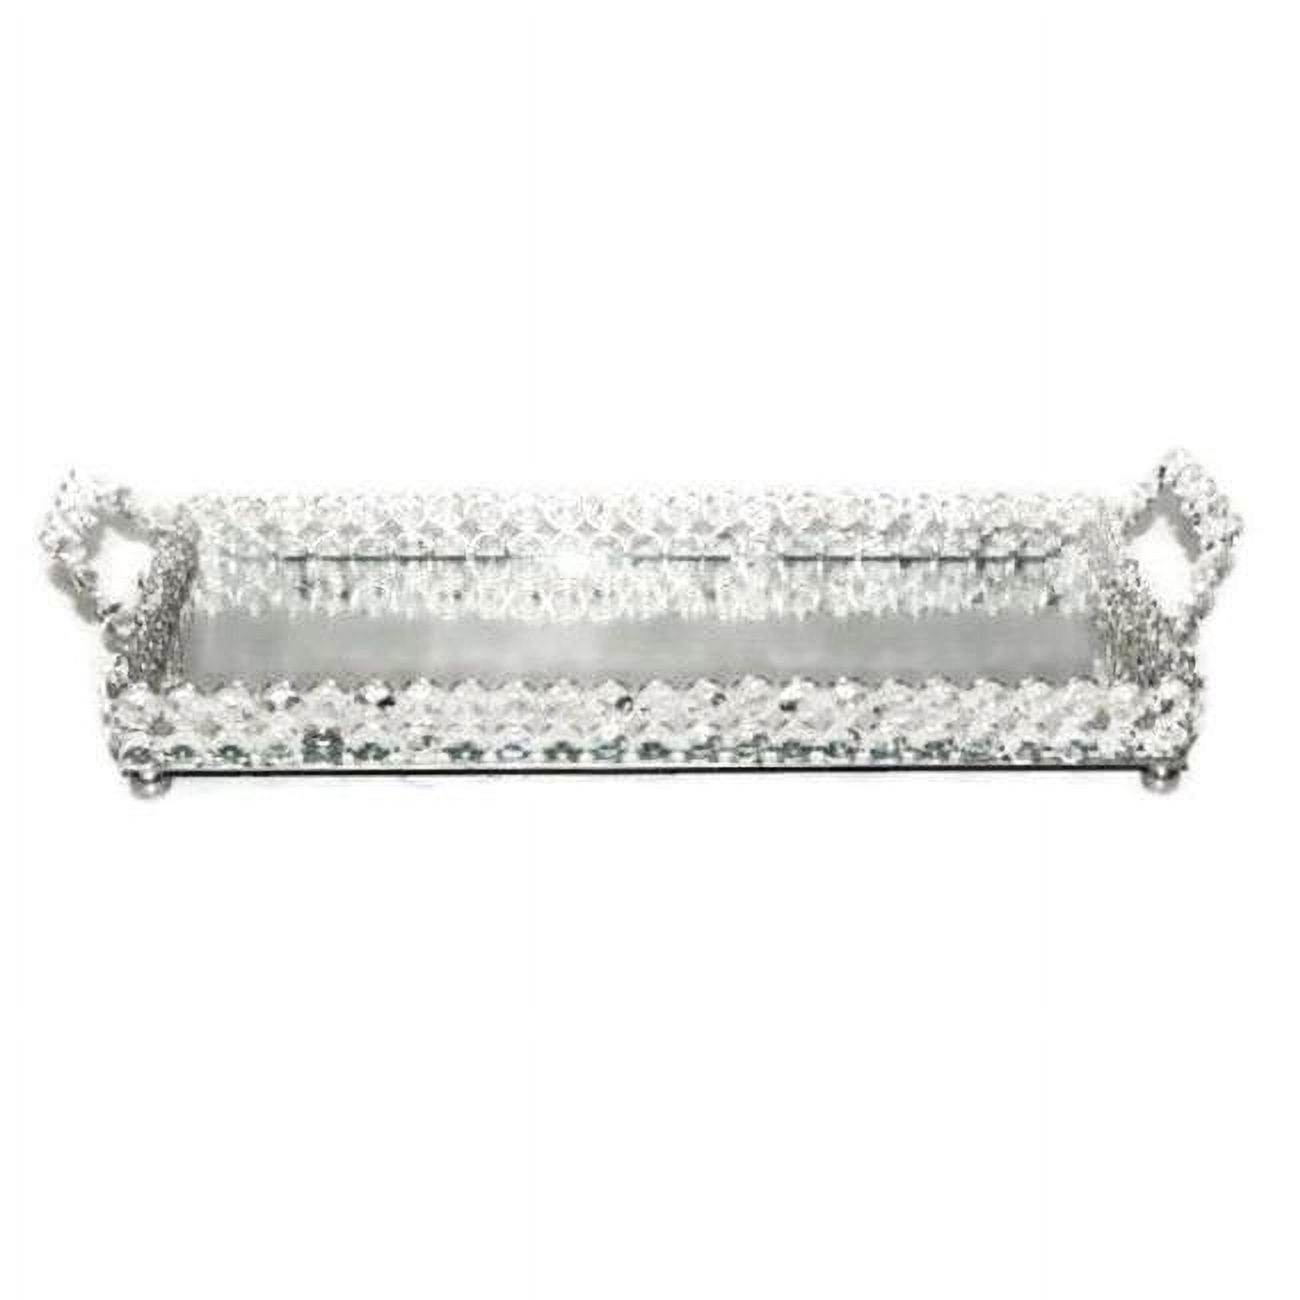 Picture of Jiallo 72870 15 x 6.75 in. Sparkle Crystal Mirror Tray